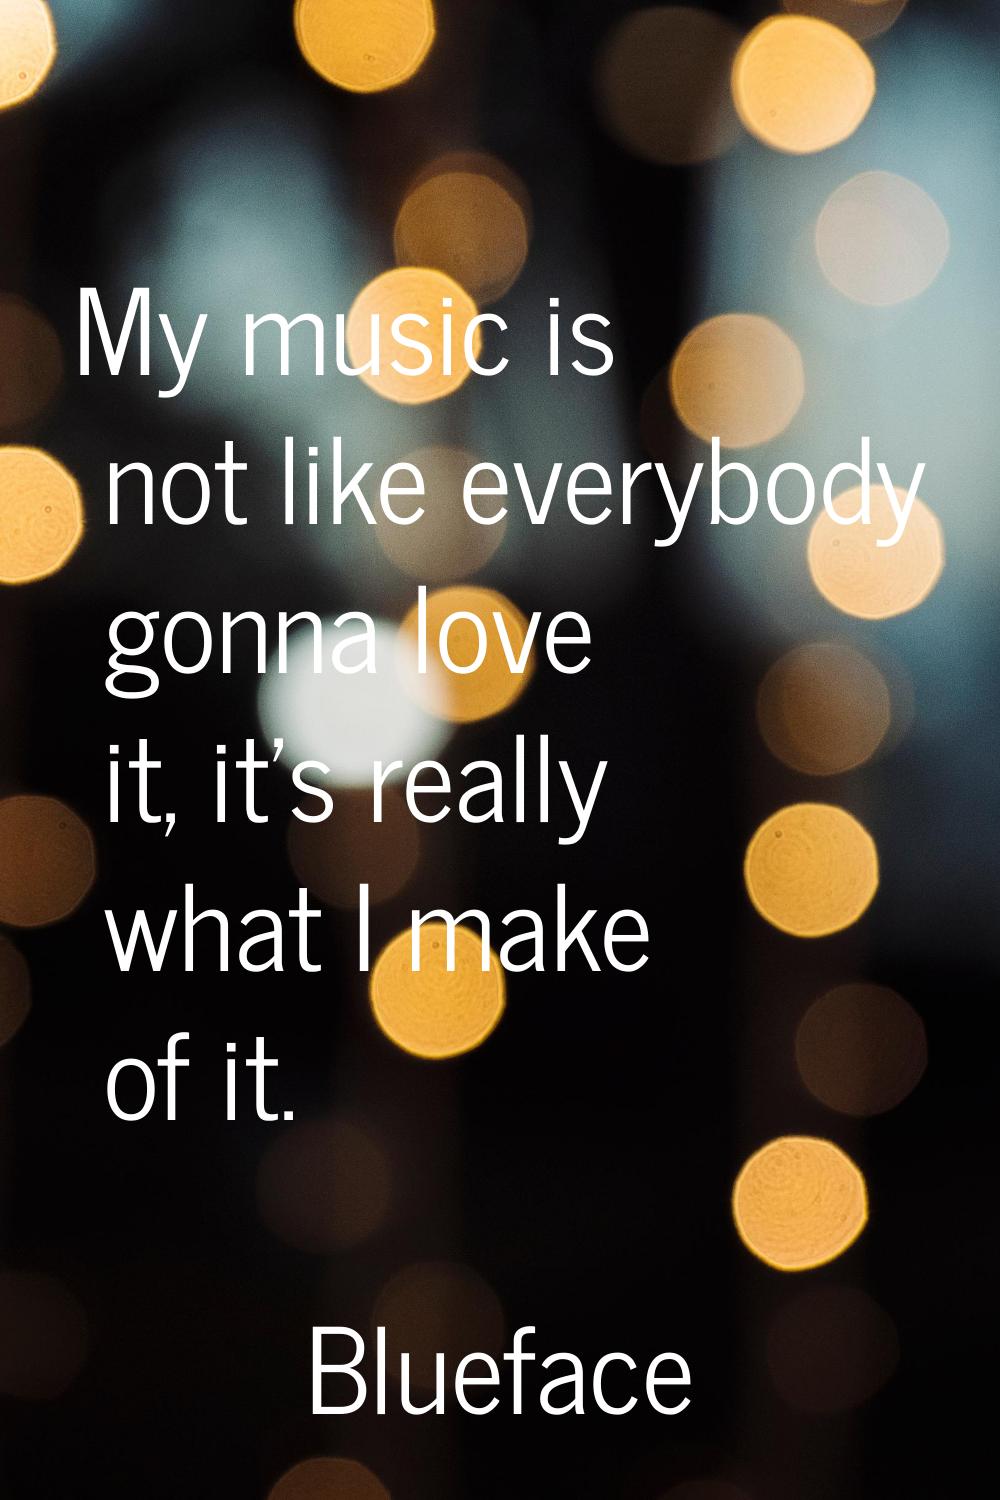 My music is not like everybody gonna love it, it's really what I make of it.